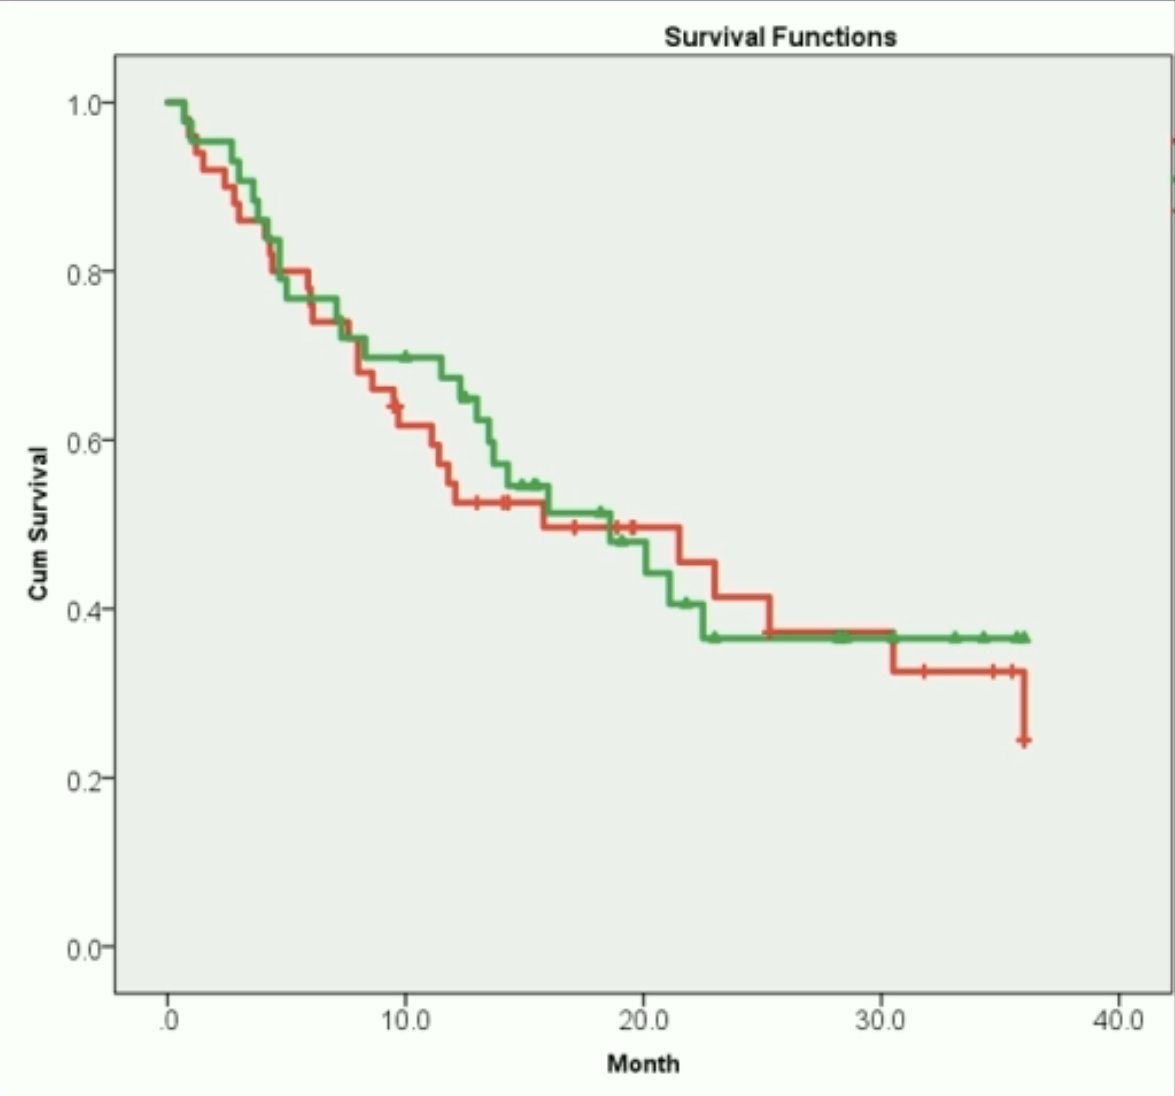 There were no significant differences in overall survival (PSMA arm: 19.5 months; Standard arm: 20 months).